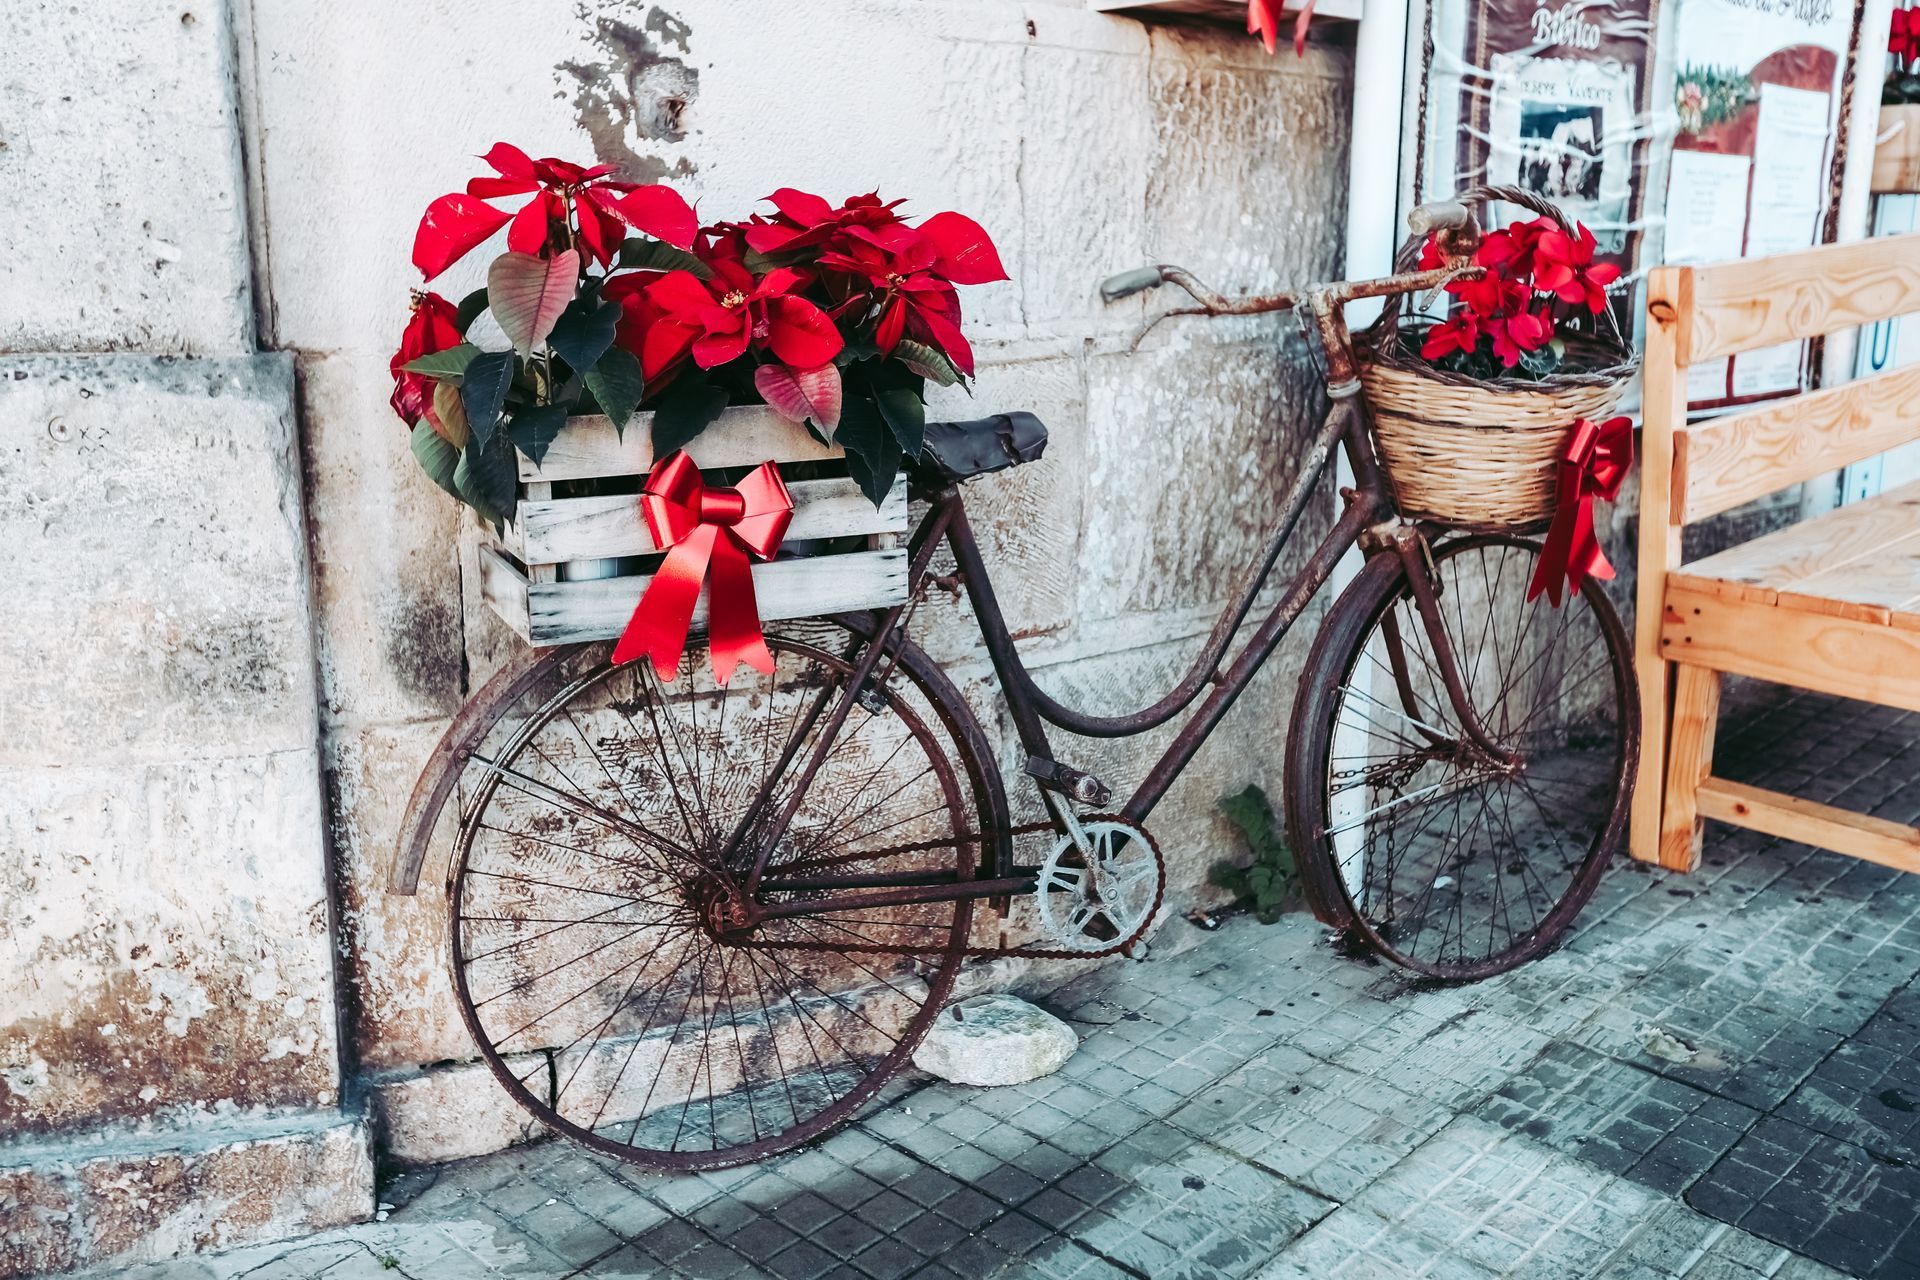 A beautiful bike adorned with red flowers parked in front of a picturesque white building in the charming city of Ostuni, Italy. The colorful flowers add a pop of color to the already picturesque scene, showcasing the city's vibrant local culture and charm.